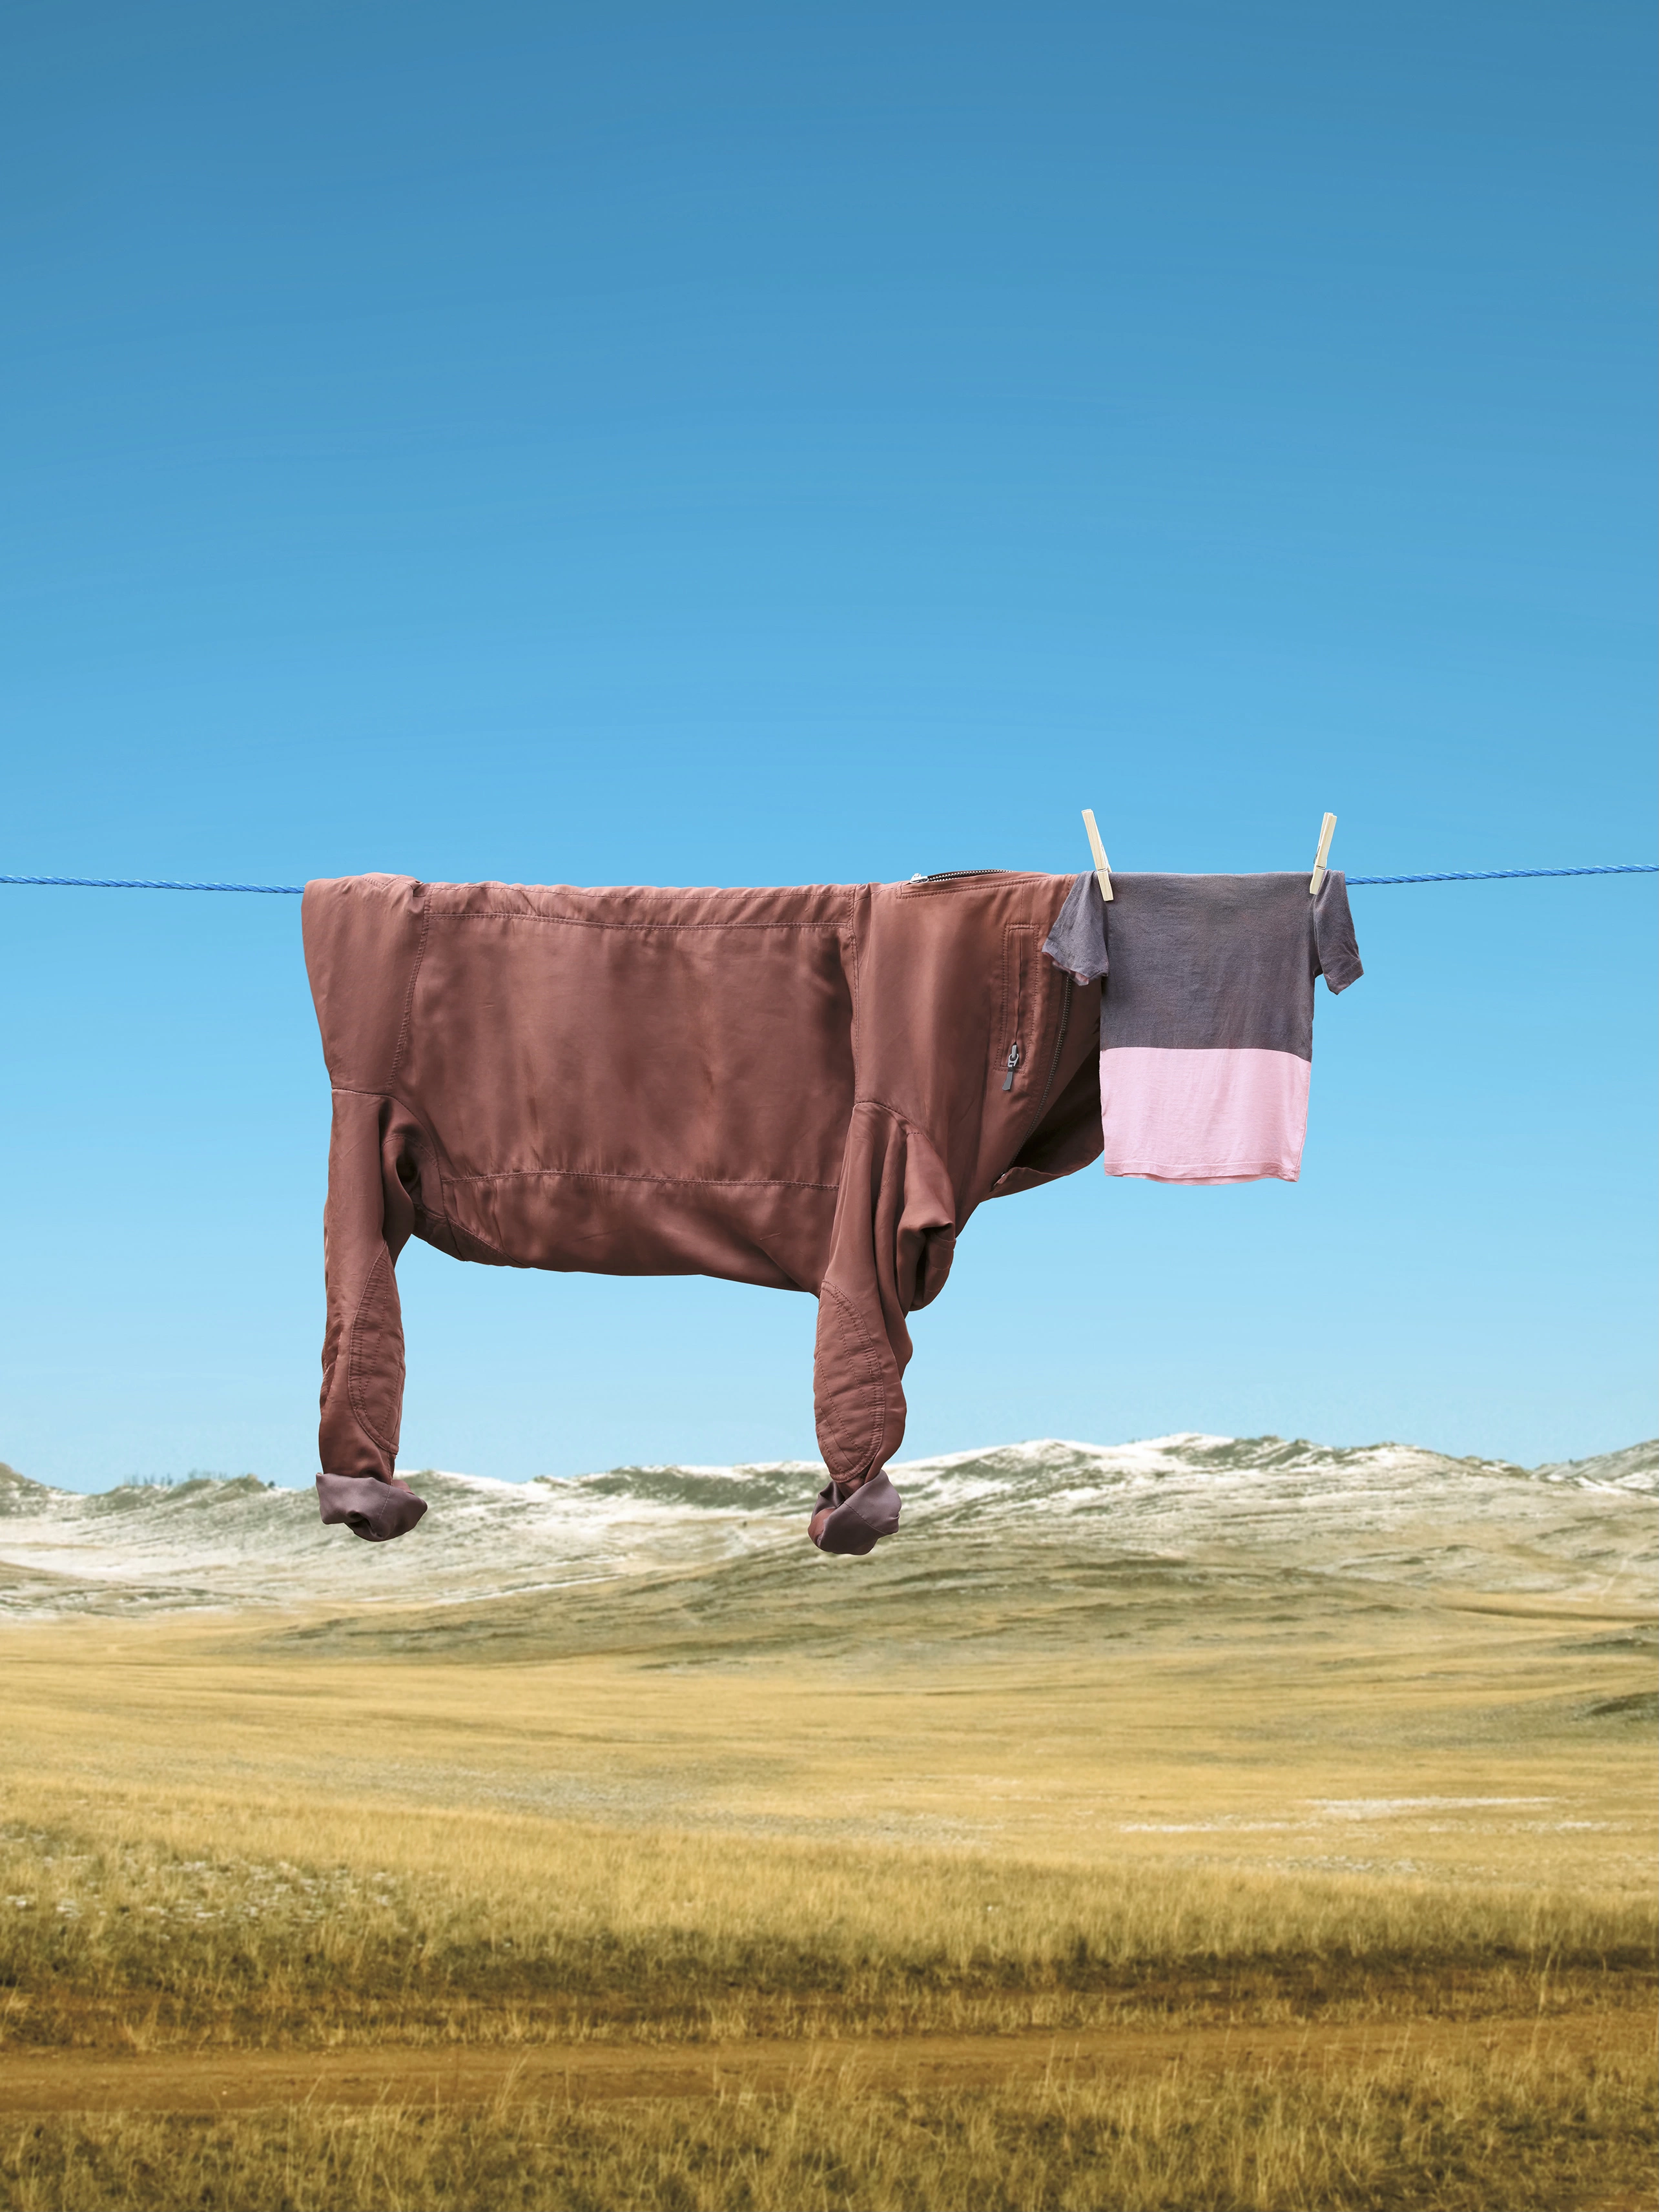 Original print of Smooothie the chocolate cow hung on clothes line in the mountains